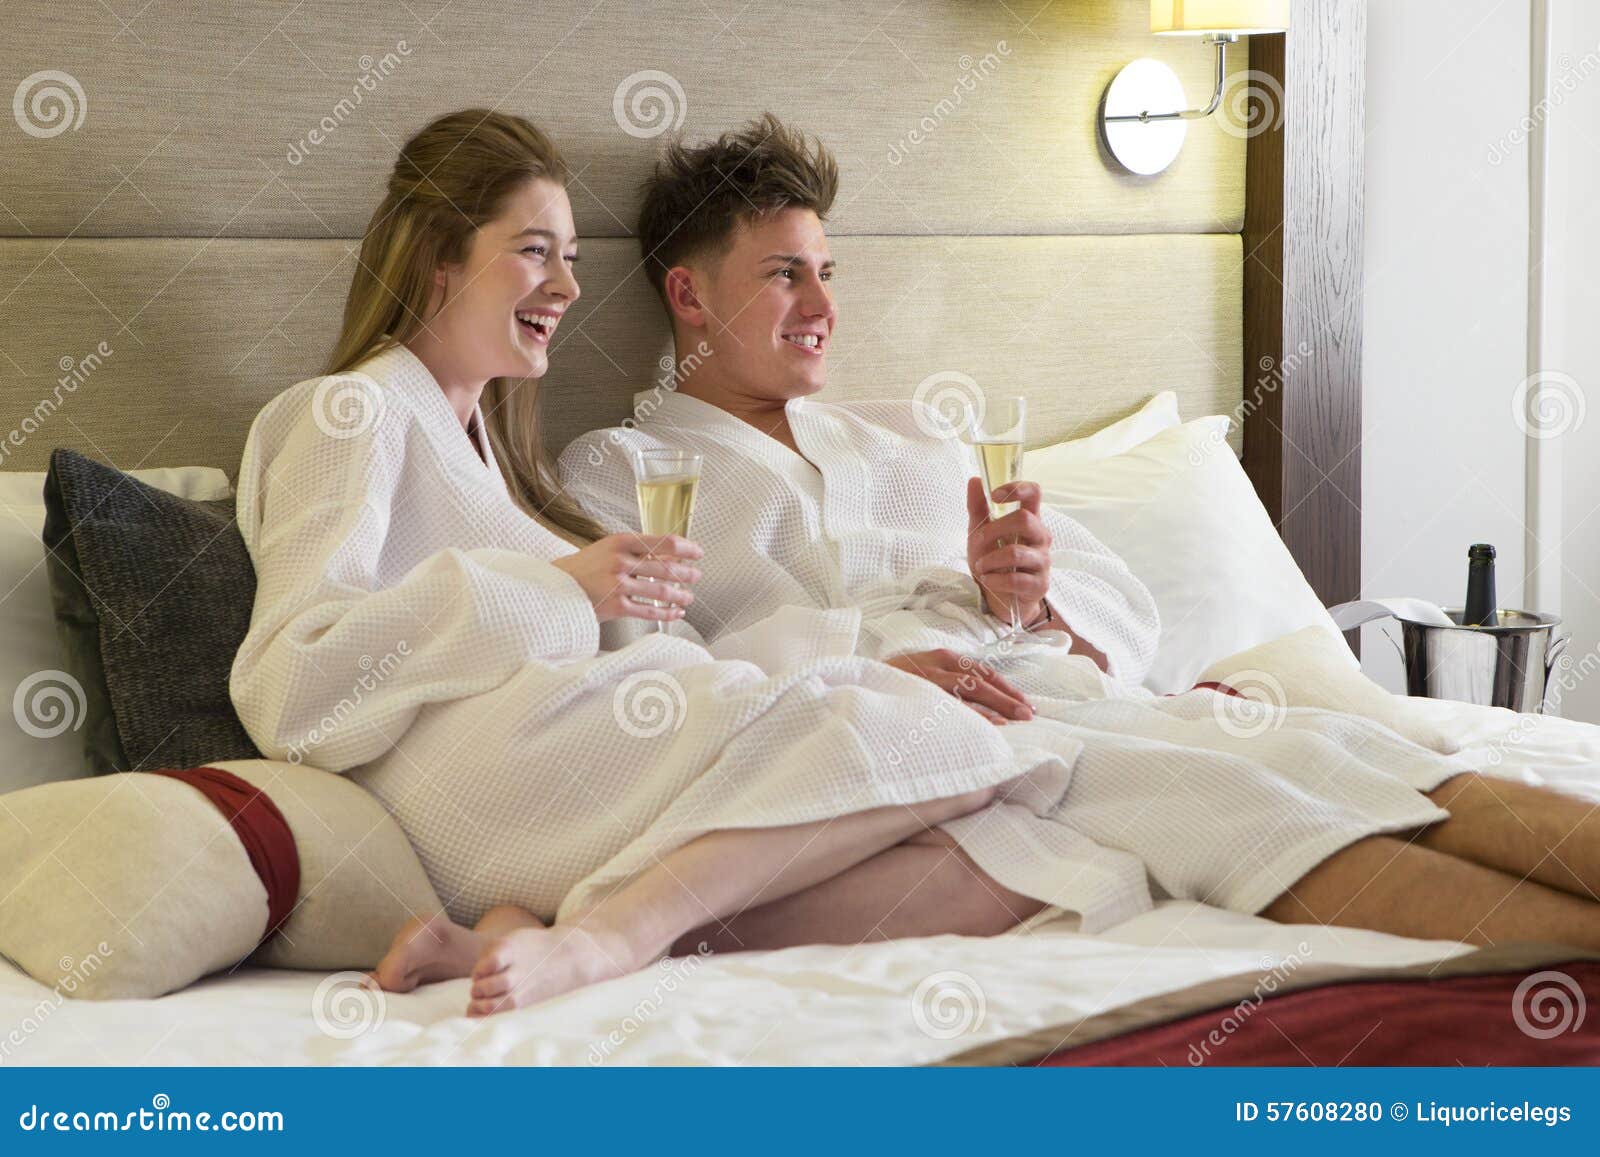 Couple Enjoying A Drink In Hotel Room Stock Photo Image Of Lying